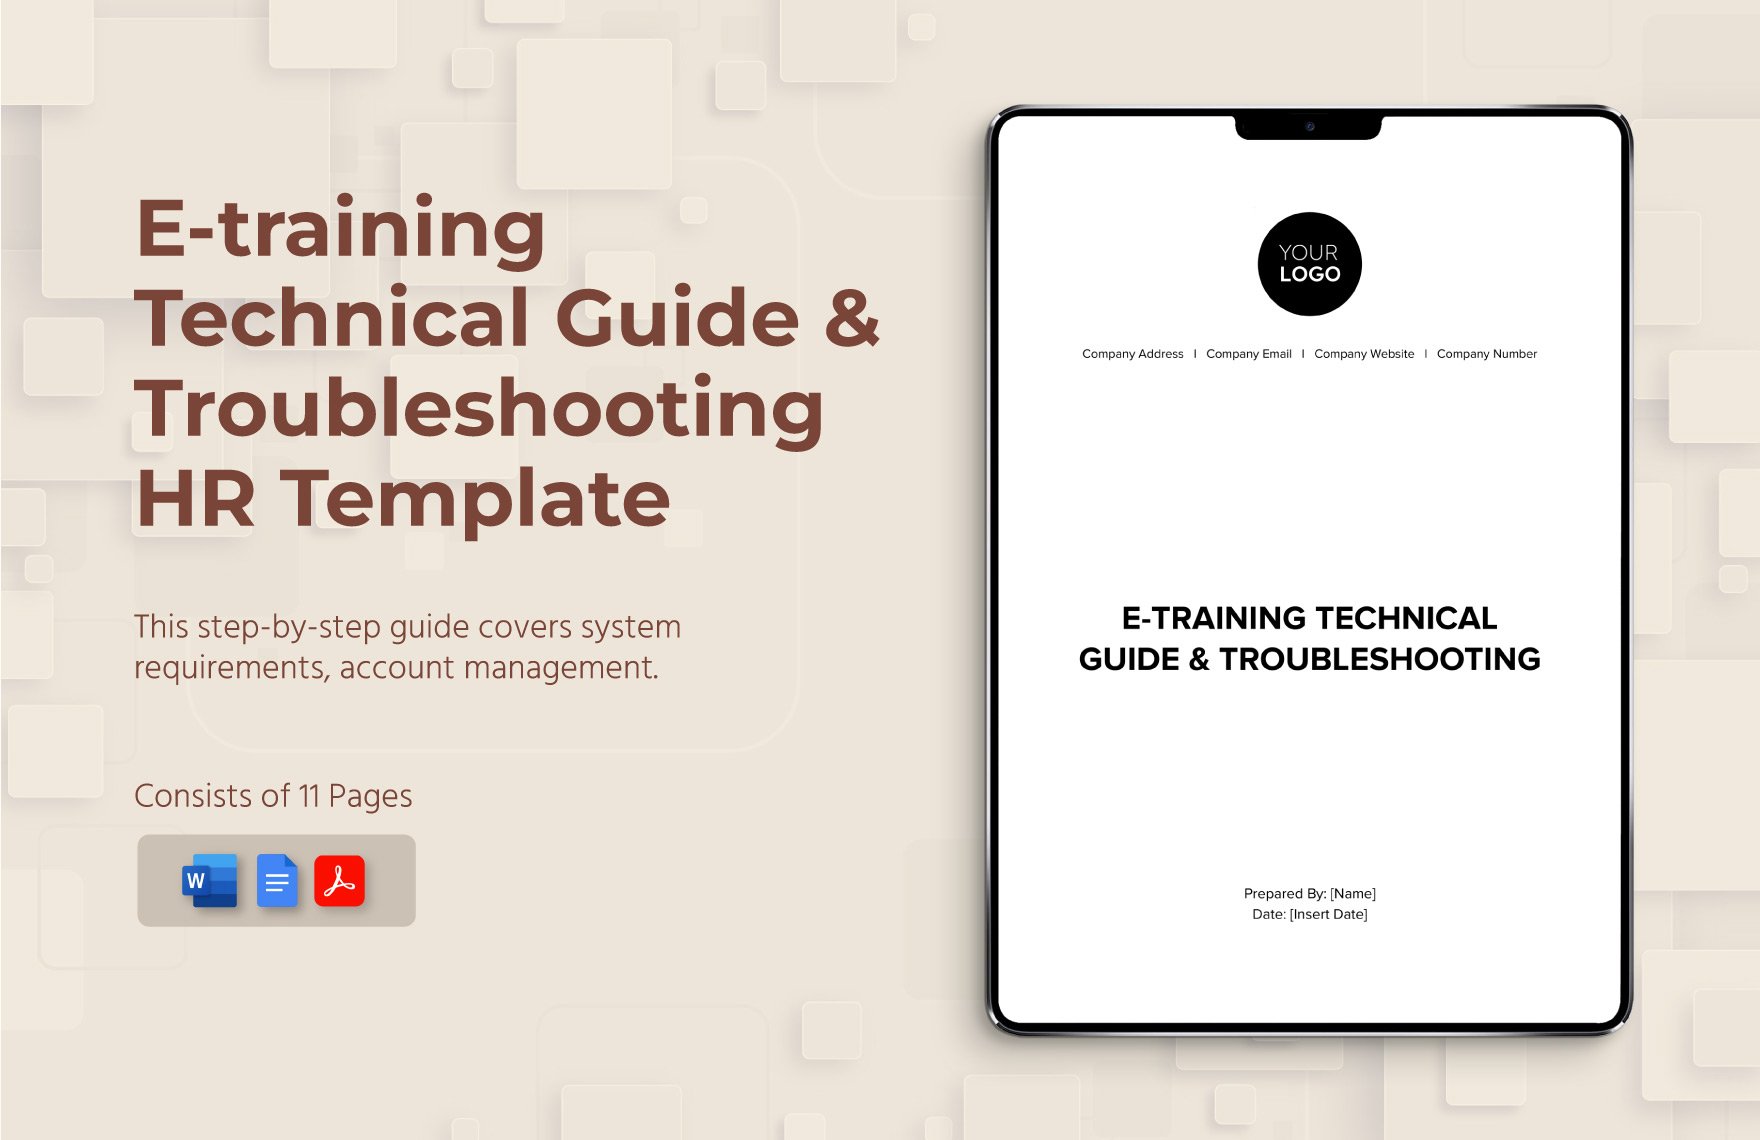 E-training Technical Guide & Troubleshooting HR Template